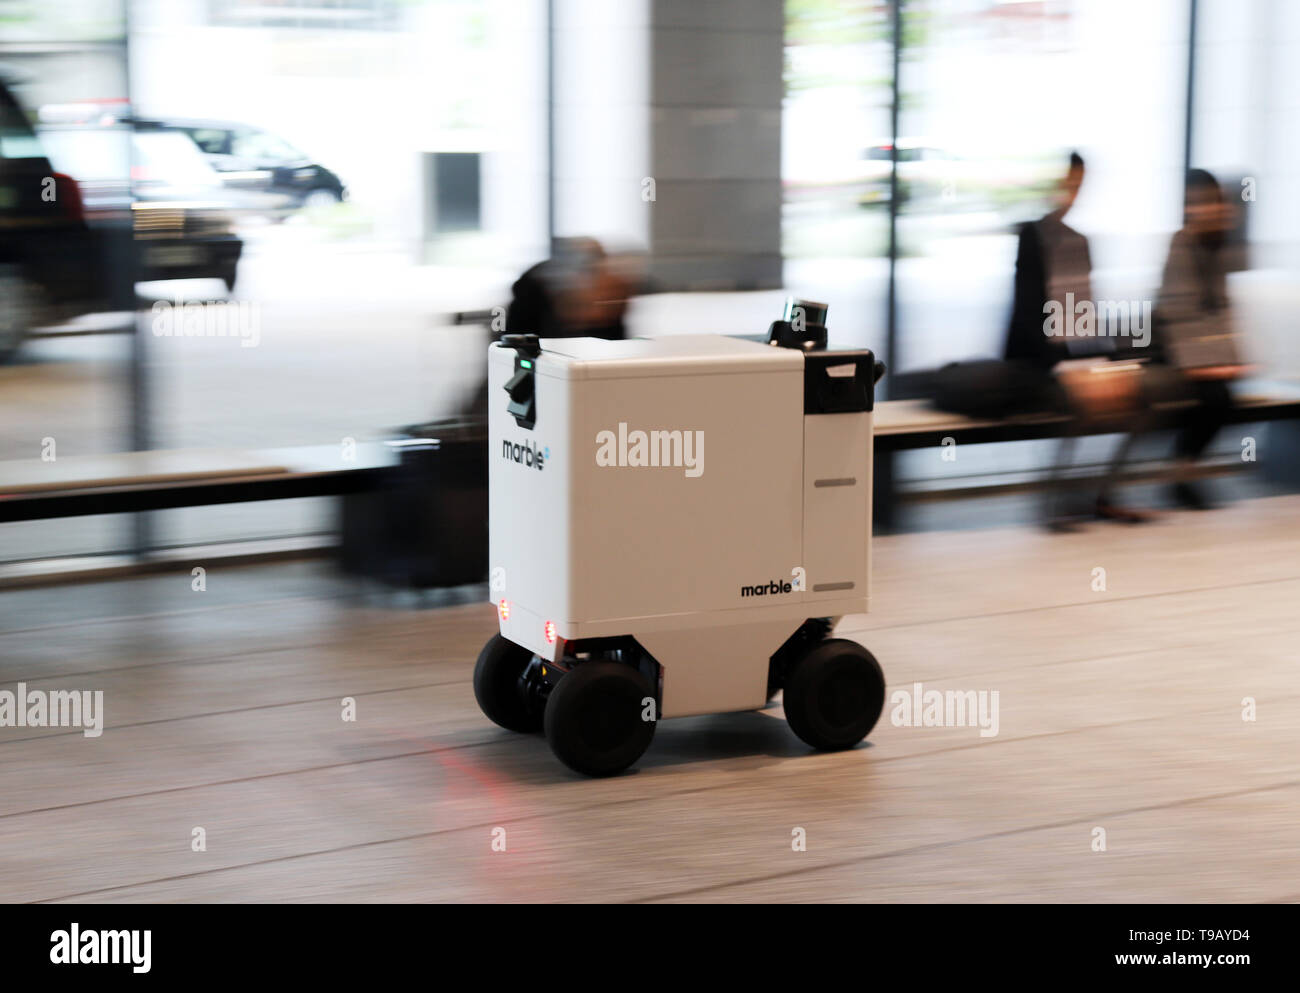 Tokyo, Japan. 17th May, 2019. Japan's Mitsubishi Estate demonstrates US robotics venture Marble's delivery robot 'Marble' which has LiDAR sensors and cameras to drive autonomously at the company's office buildings at Tokyo's Marunouchi business district on Friday, May 17, 2019. Japan's largest developer Mitsubishi Estate and San Francisco based Marble started field test of delivery service for last one mile at Mitsubishi's office building complex. Credit: Yoshio Tsunoda/AFLO/Alamy Live News Stock Photo